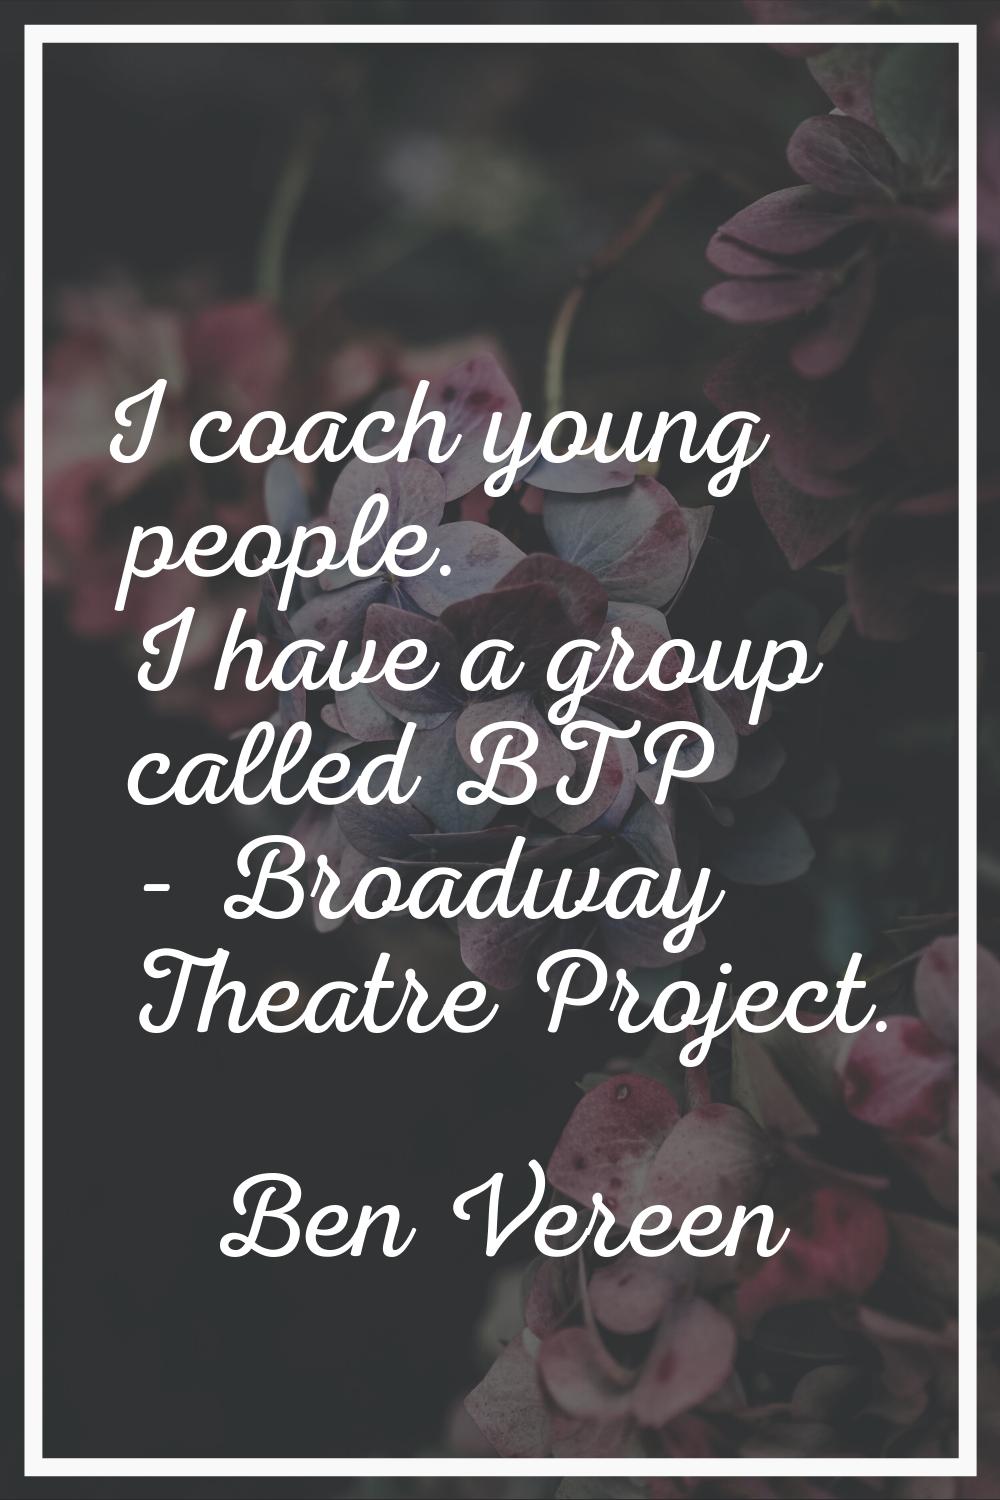 I coach young people. I have a group called BTP - Broadway Theatre Project.